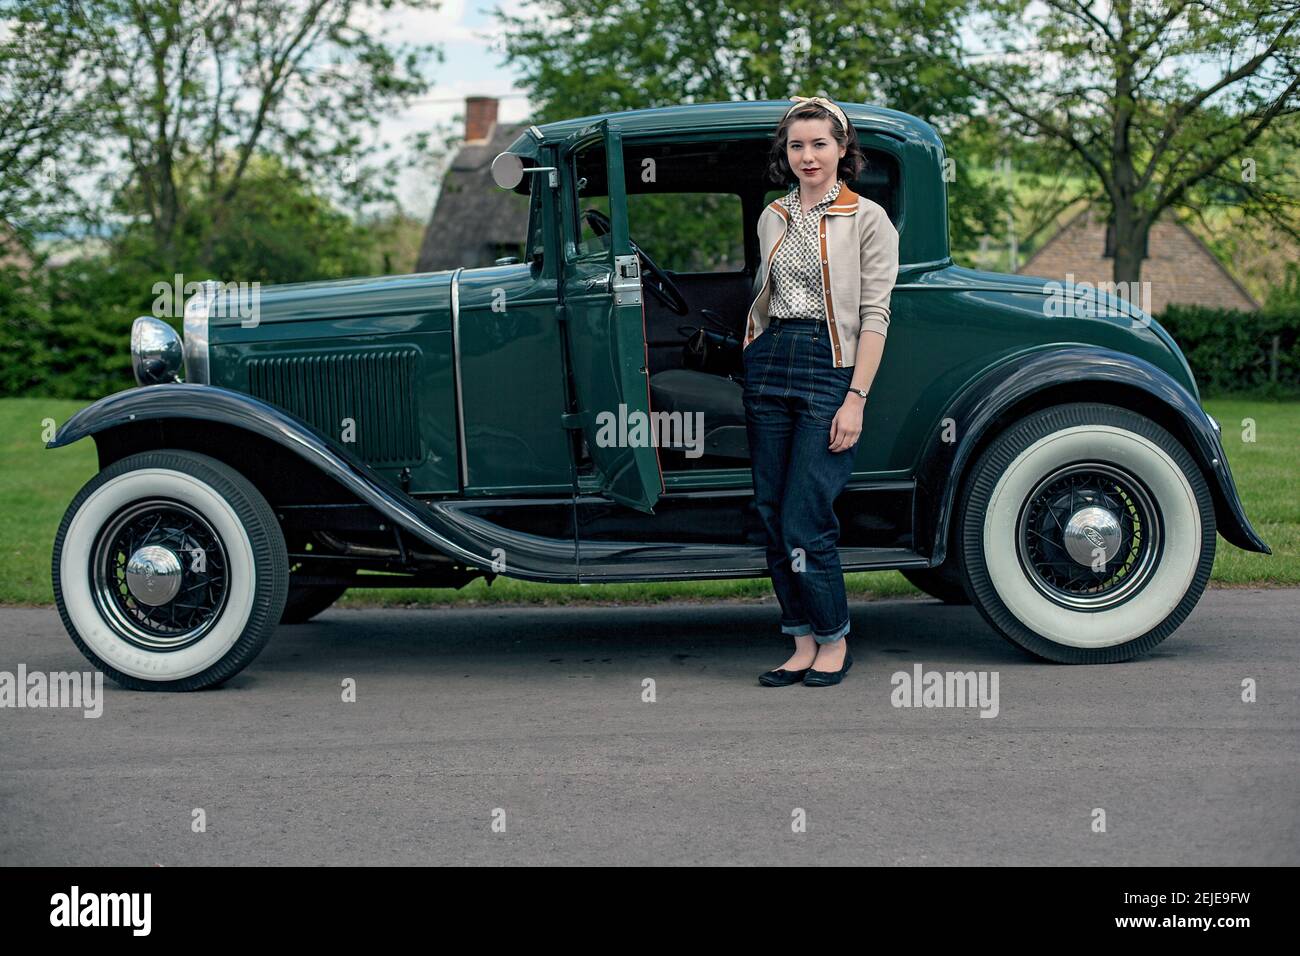 Young woman standing next to a vintage car. Stock Photo